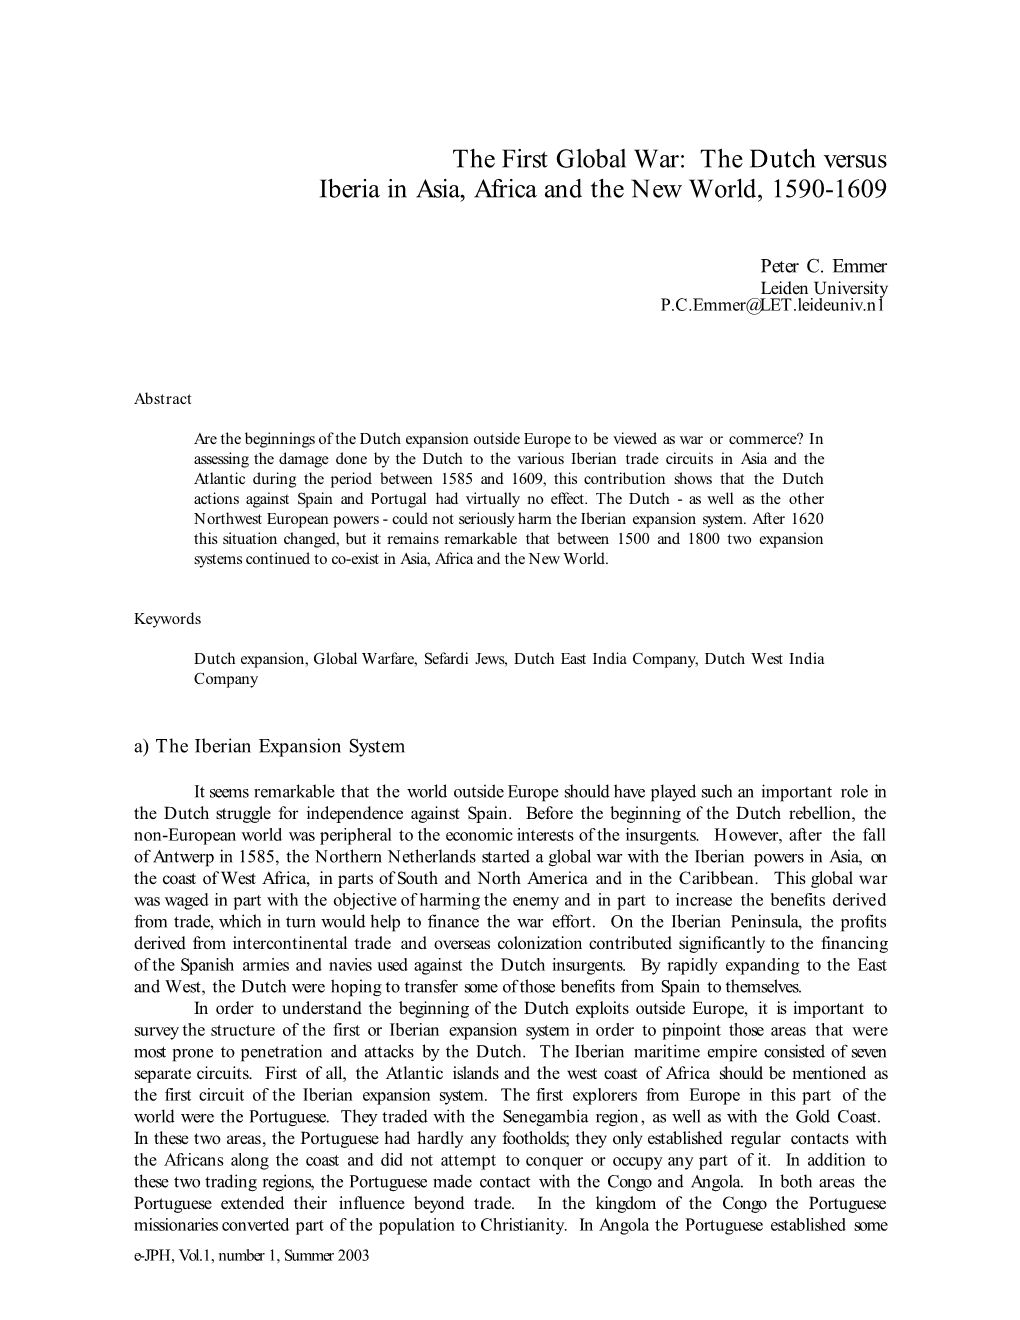 The First Global War: the Dutch Versus Iberia in Asia, Africa and the New World, 1590-1609